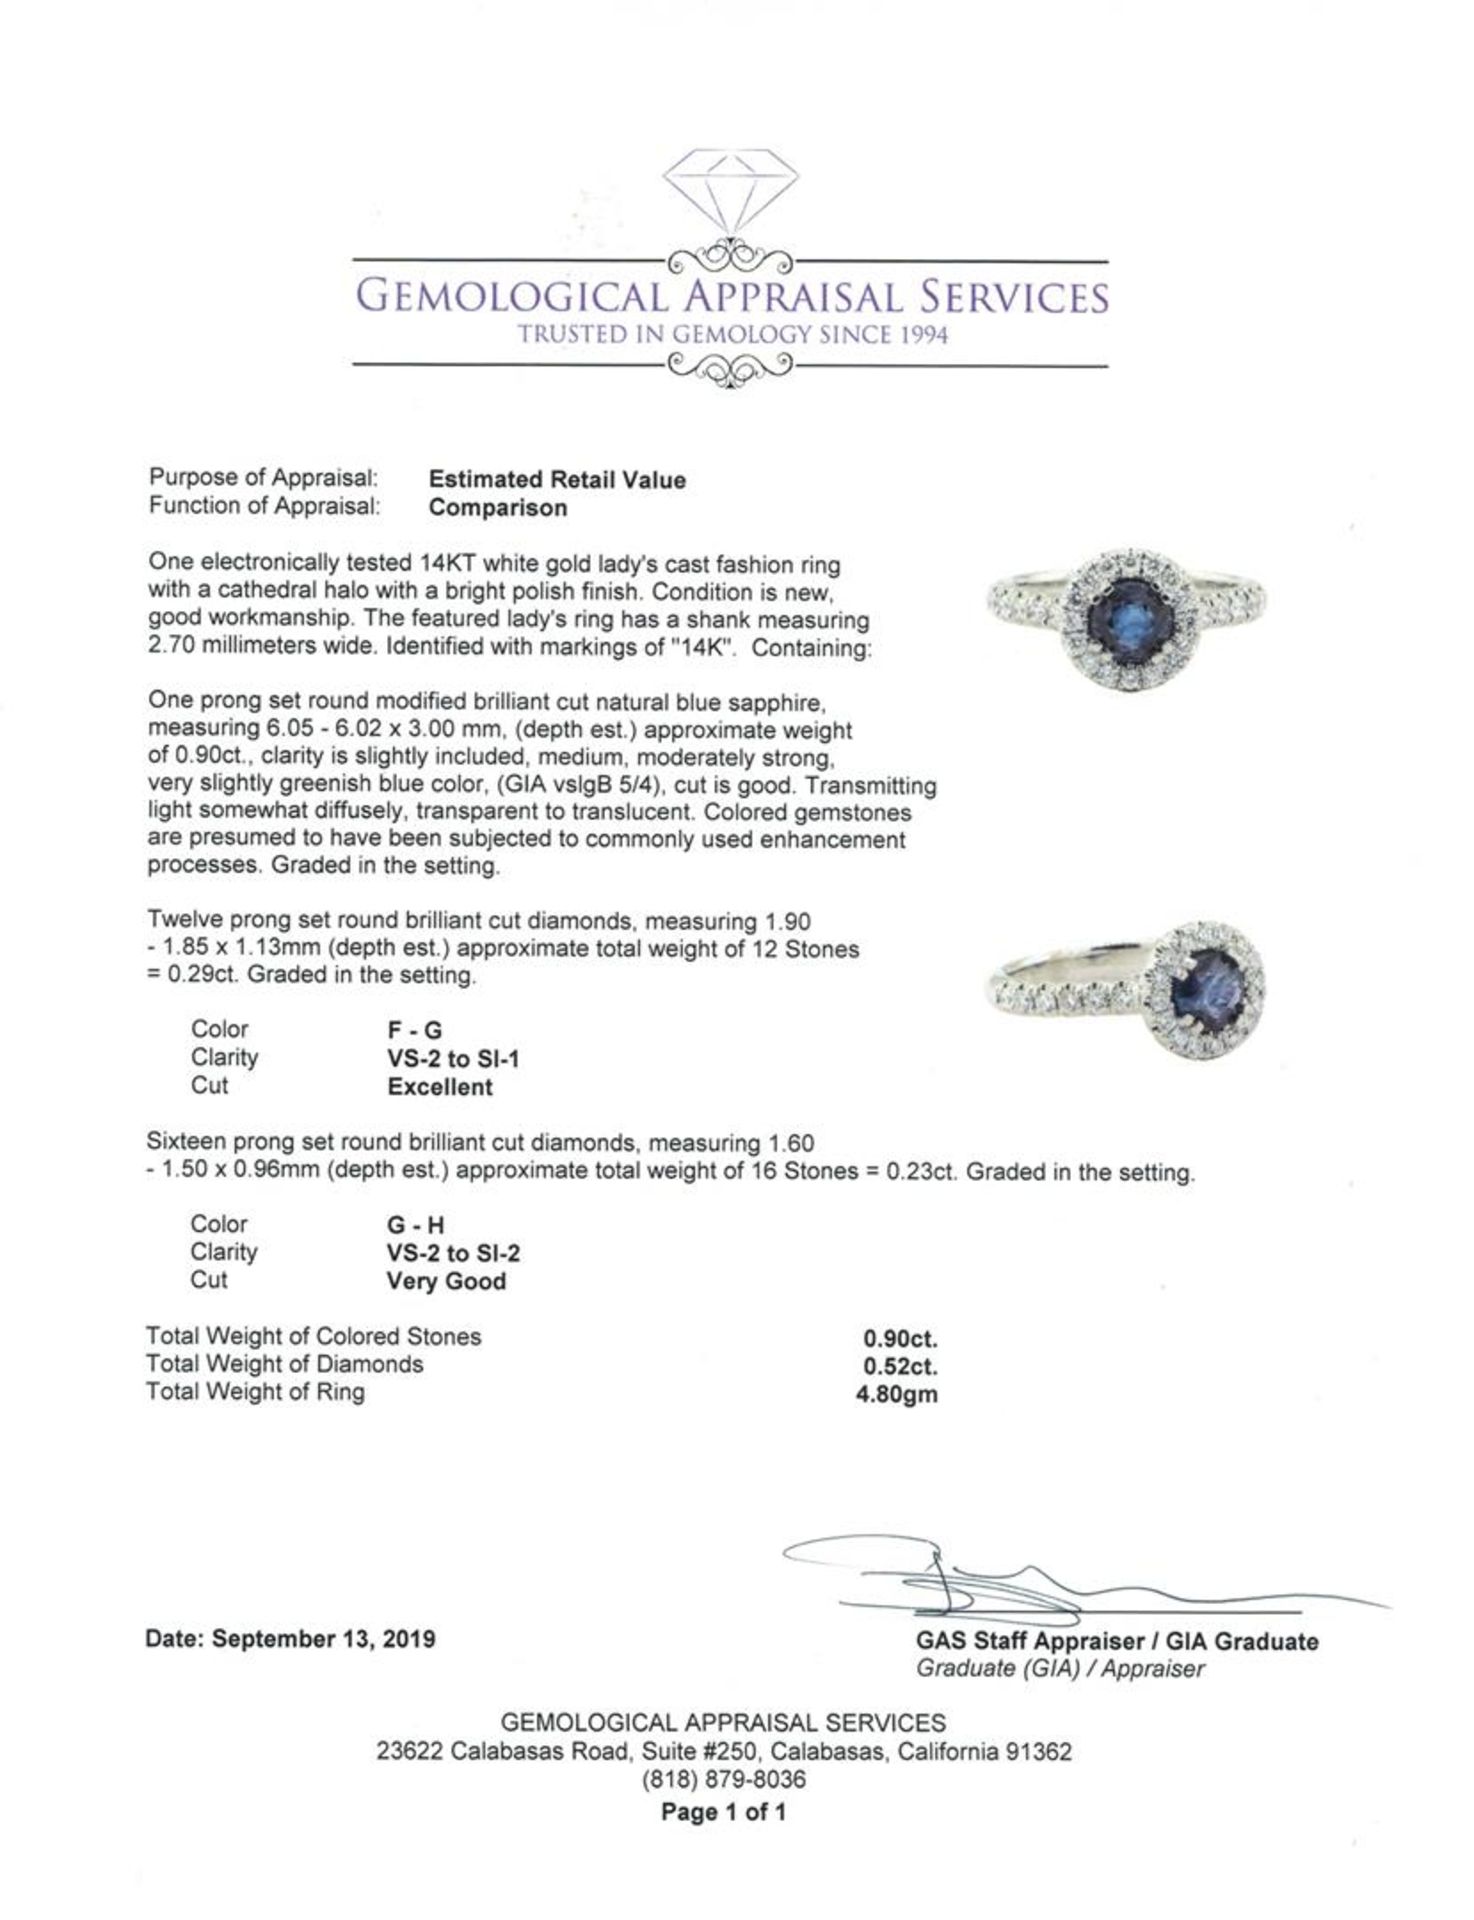 1.42 ctw Sapphire And Diamond Ring - 14KT White Gold - Image 10 of 10